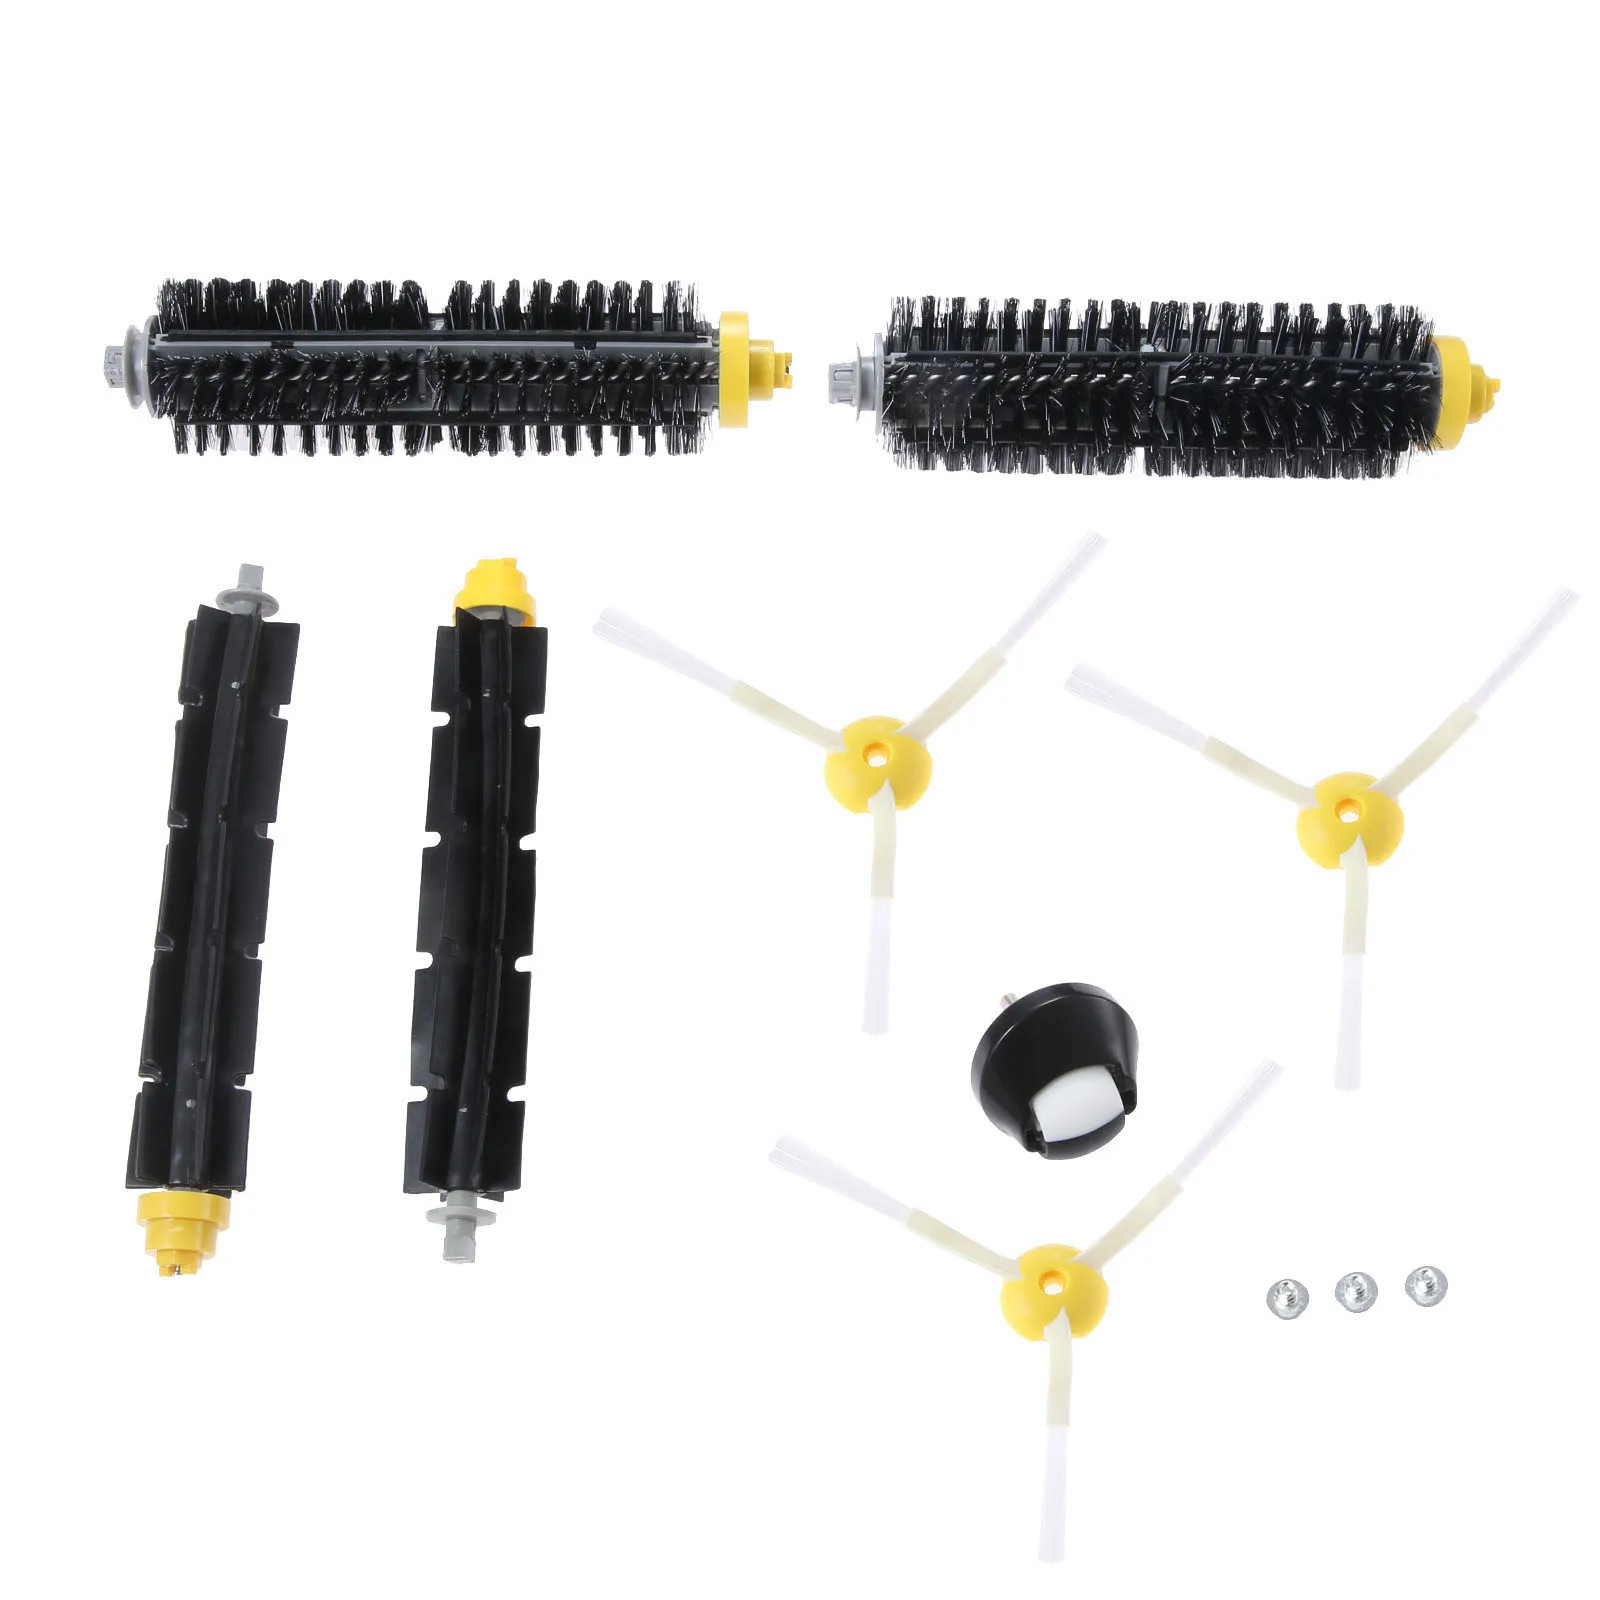 

8pcs/kit Vacuum Cleaning Robots Replacement fits for 600/700 Series Bristle Brush Beater Brush 3-armed Side Brush Castor Wheel